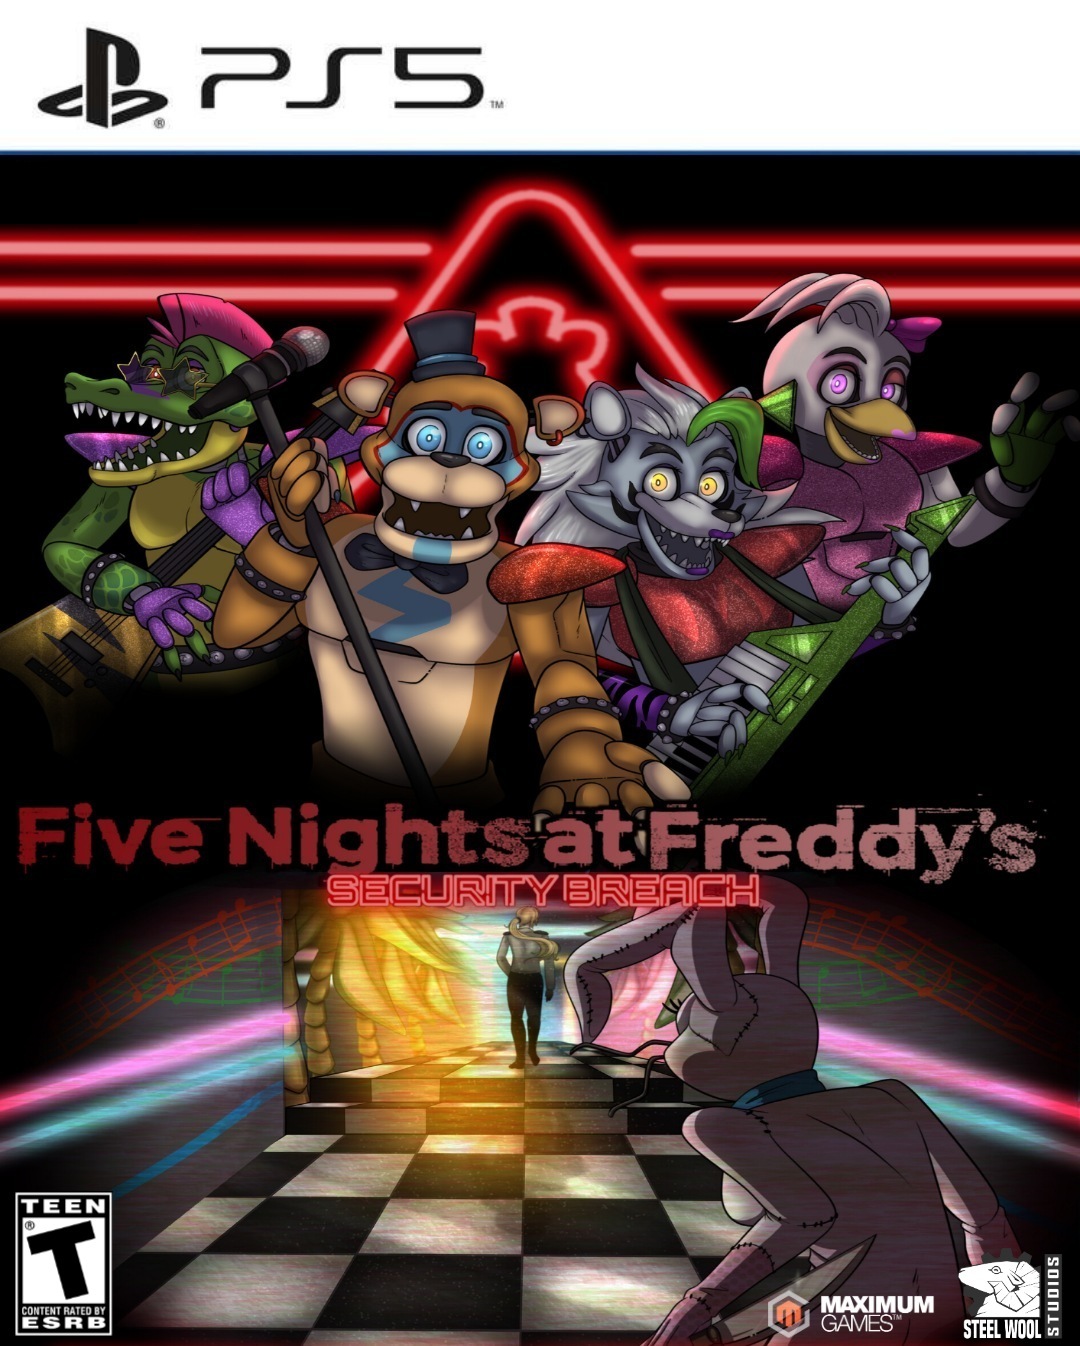 Security Breach PS5, Xbox, and Switch Boxart mockups! :  r/fivenightsatfreddys